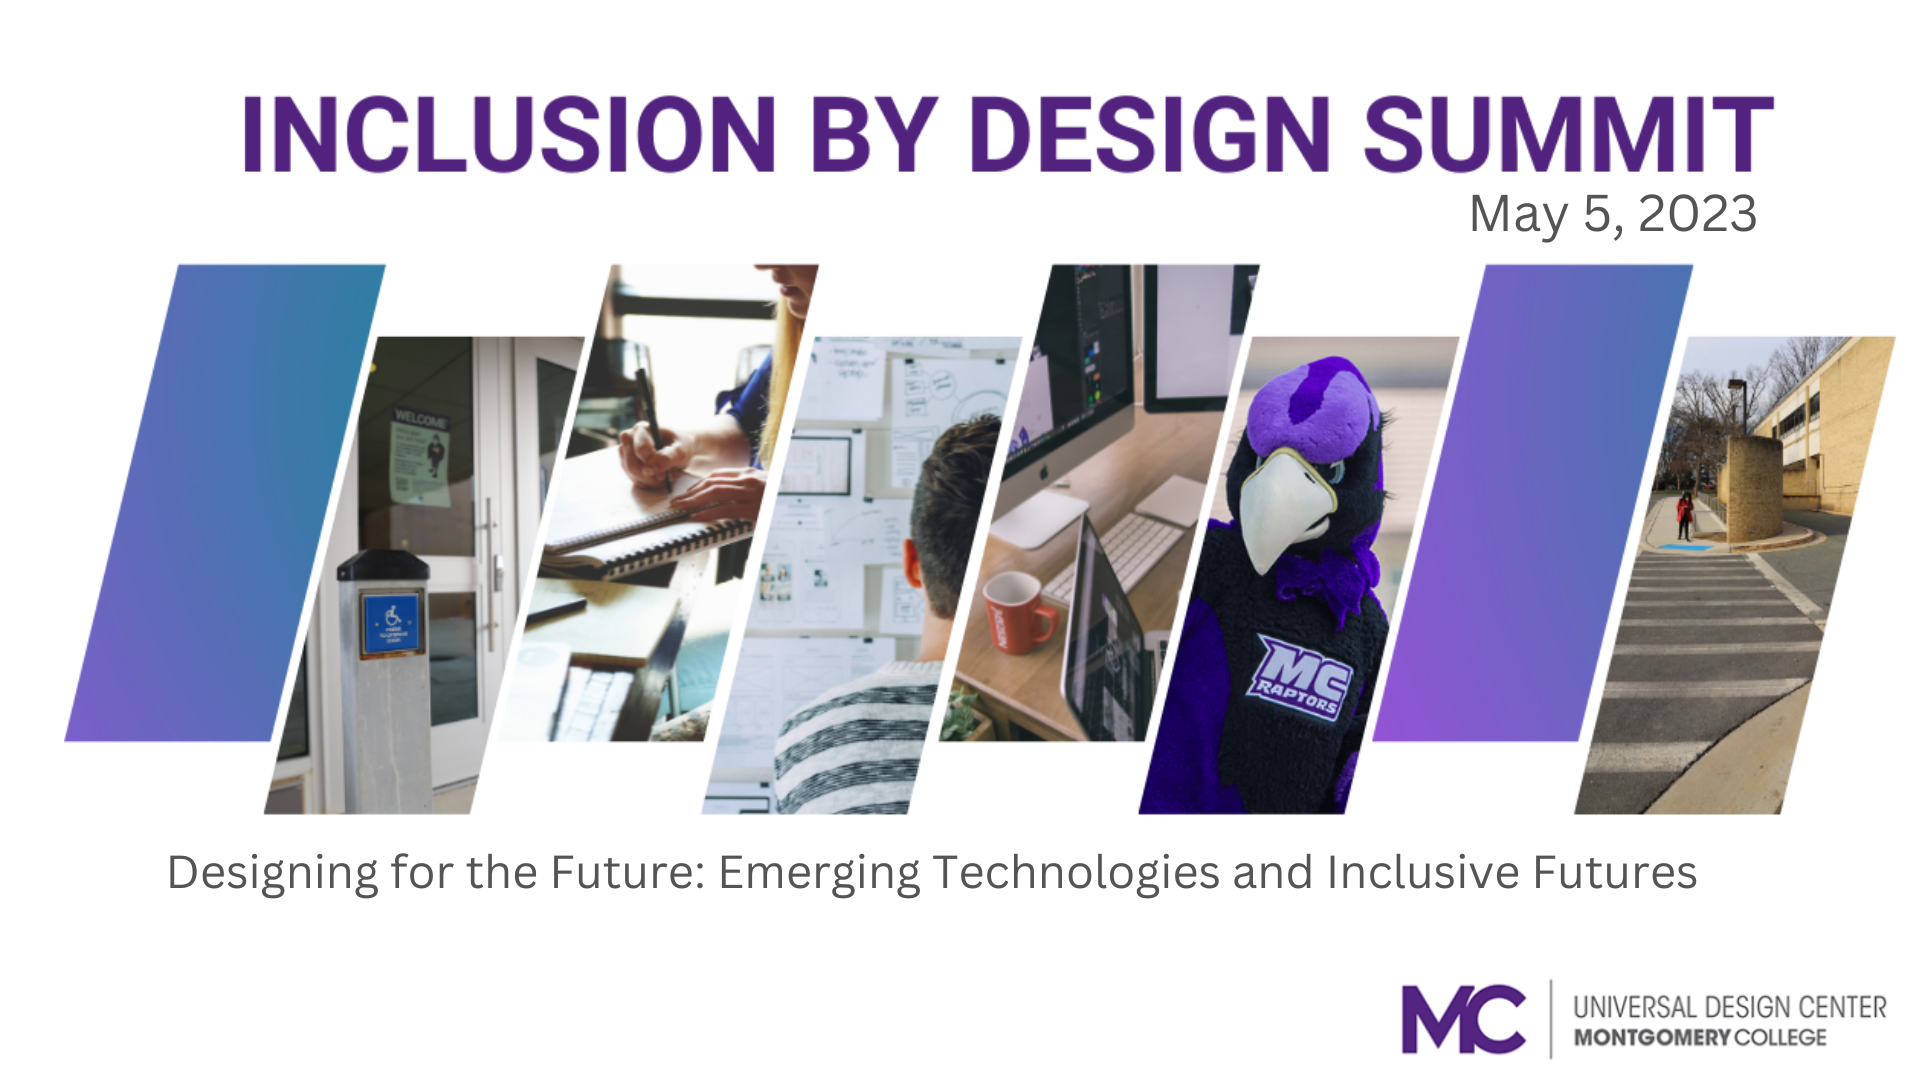 Inclusion by Design Summit. Designing the future. EmergingTechnologies and Inclusive futures